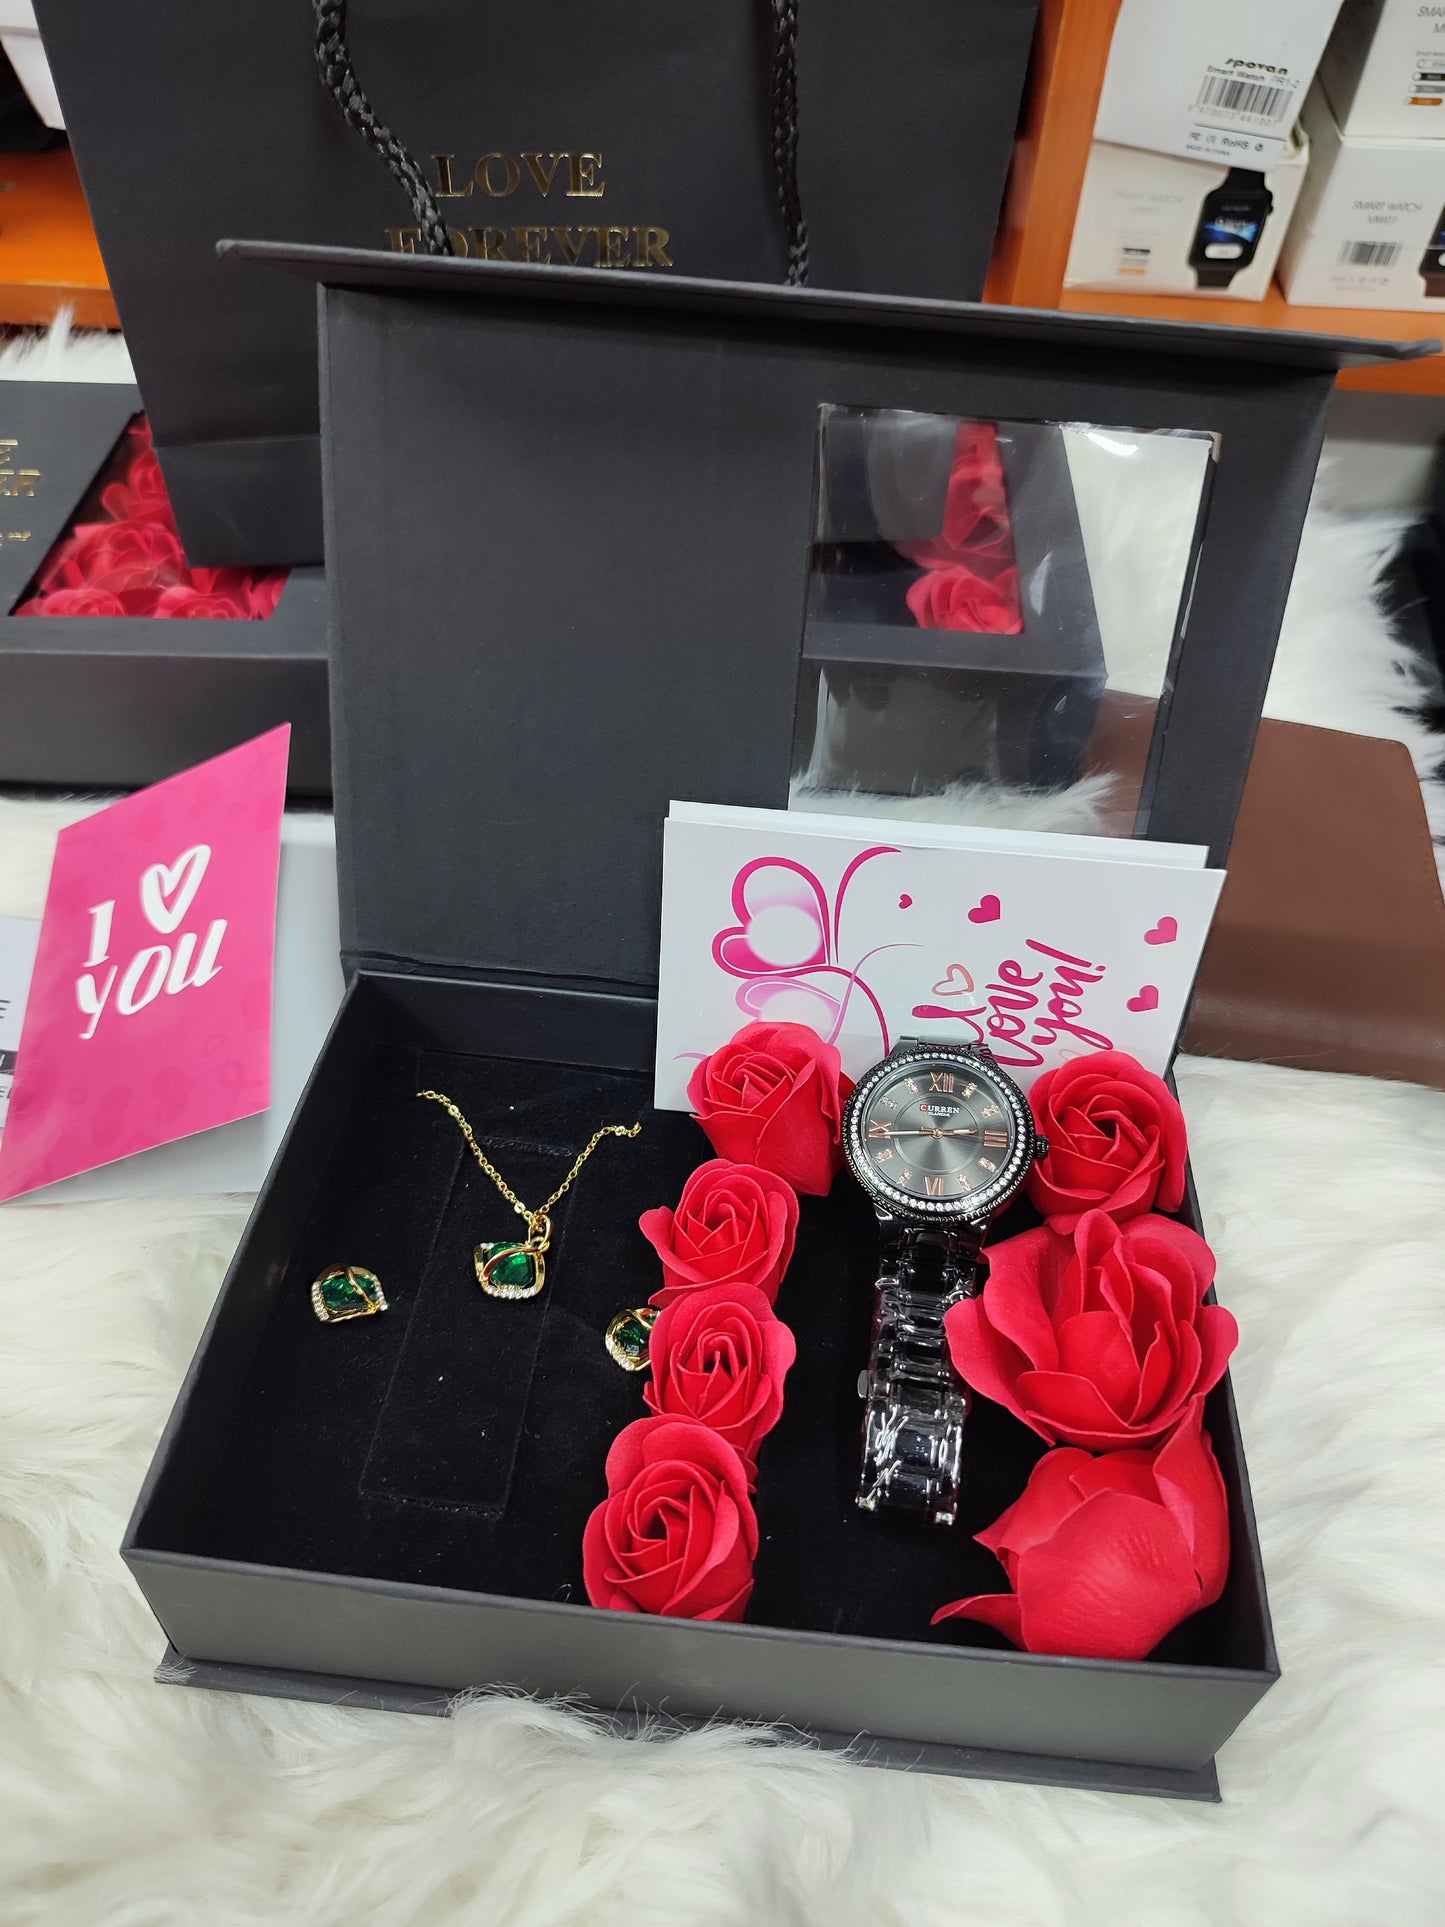 LADIES  GIFT SET (Watch,Necklace,Earrings, Preserved roses,a note and gift bag)